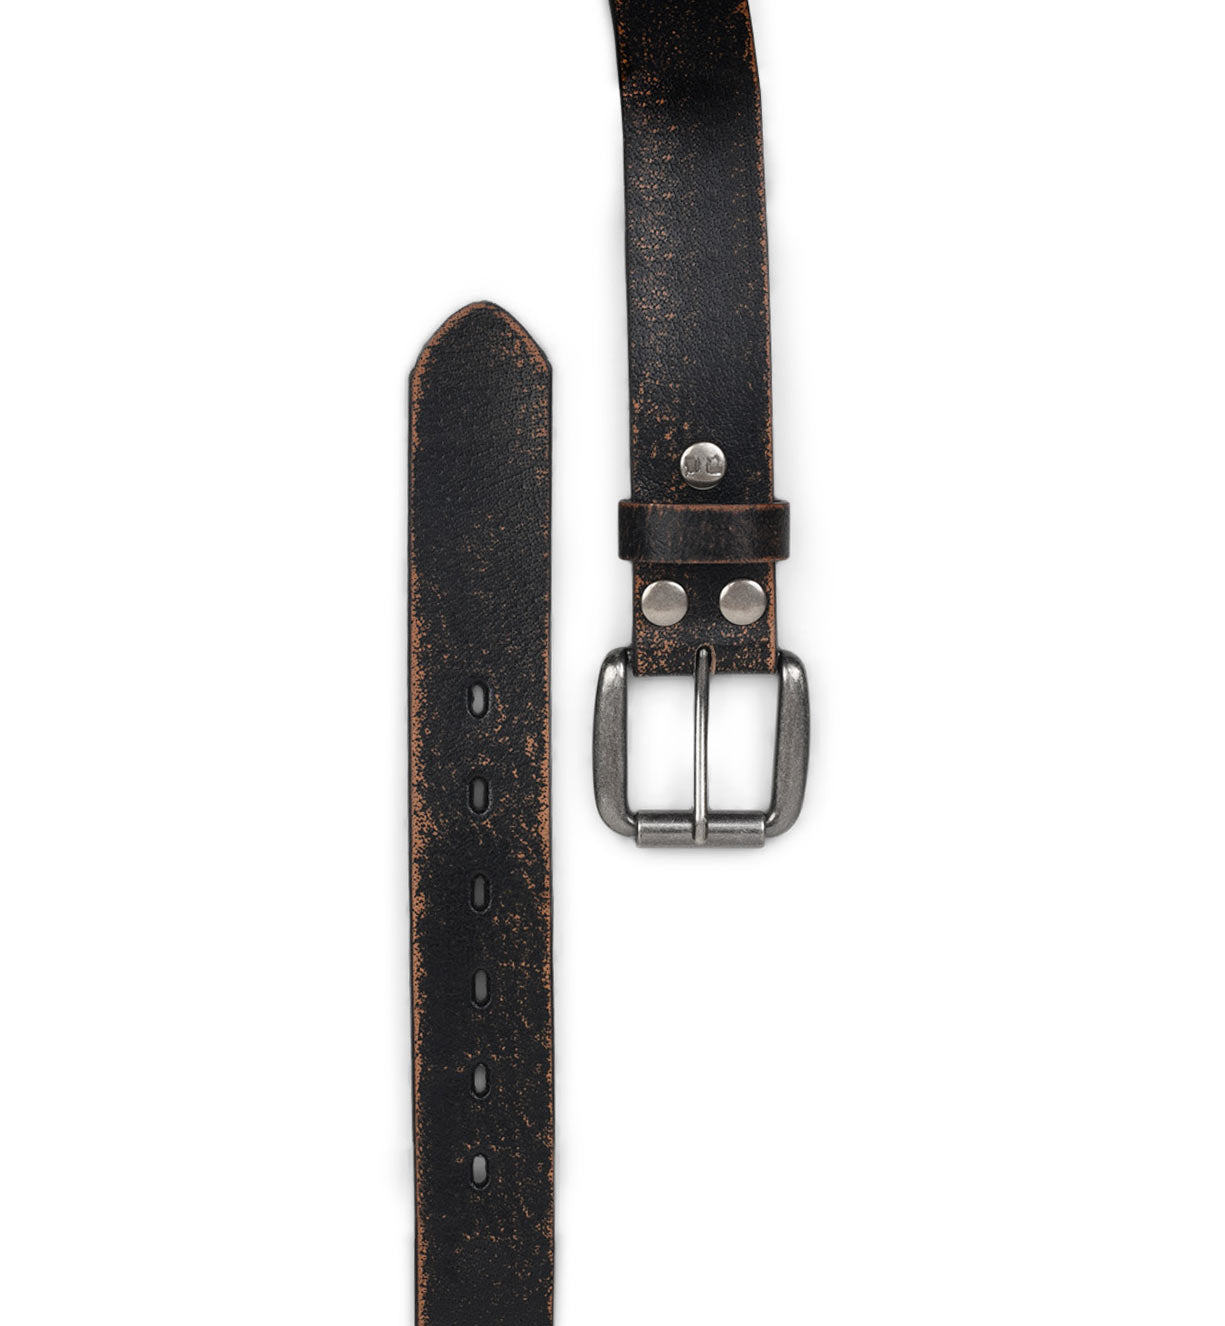 A black leather Drifter belt on a white background by Bed Stu.